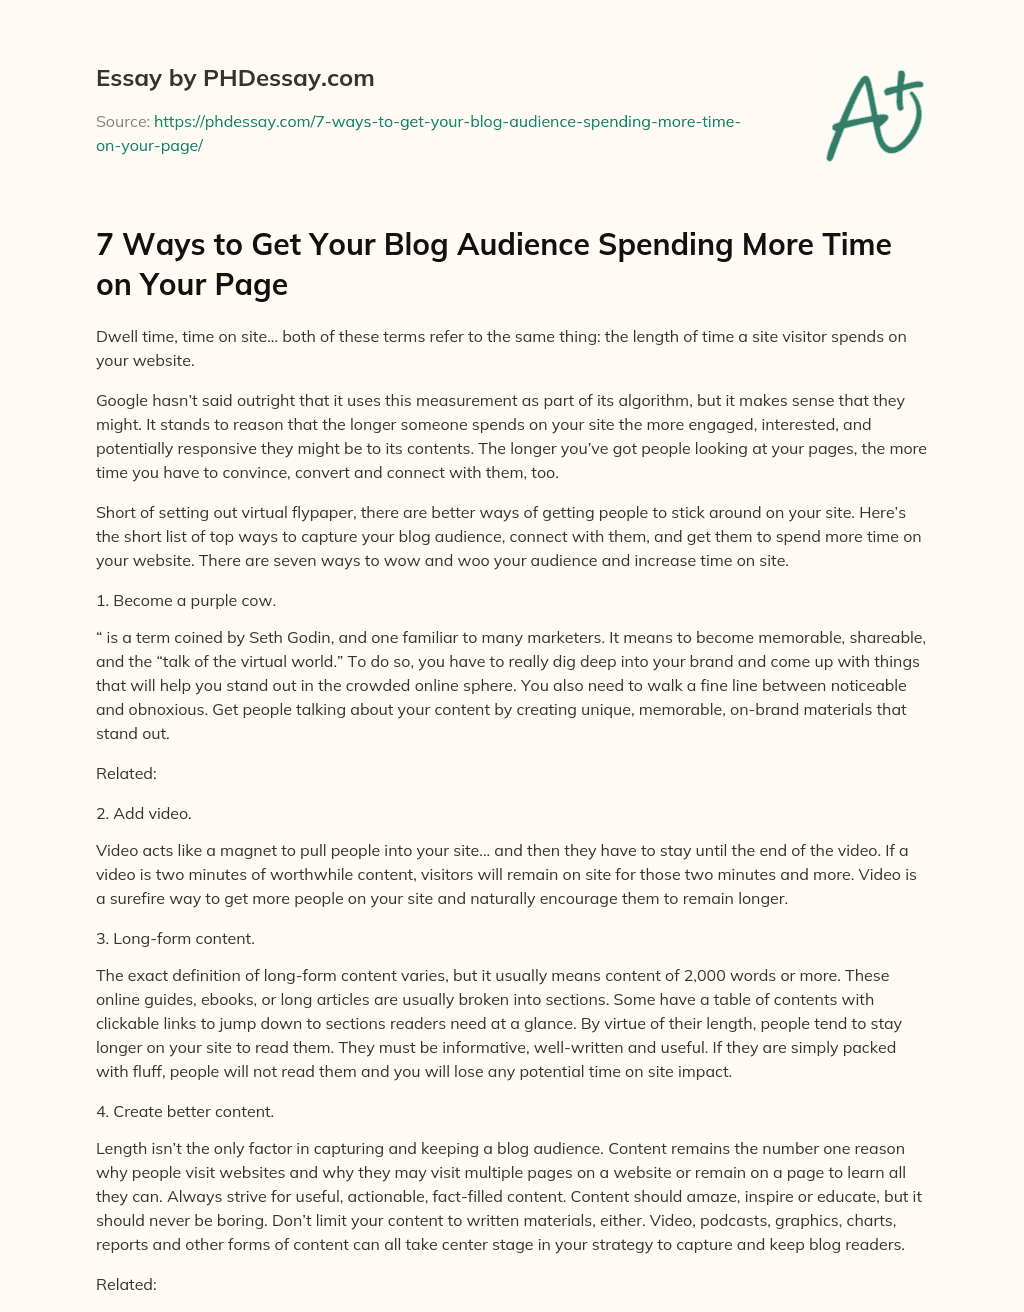 7 Ways to Get Your Blog Audience Spending More Time on Your Page essay